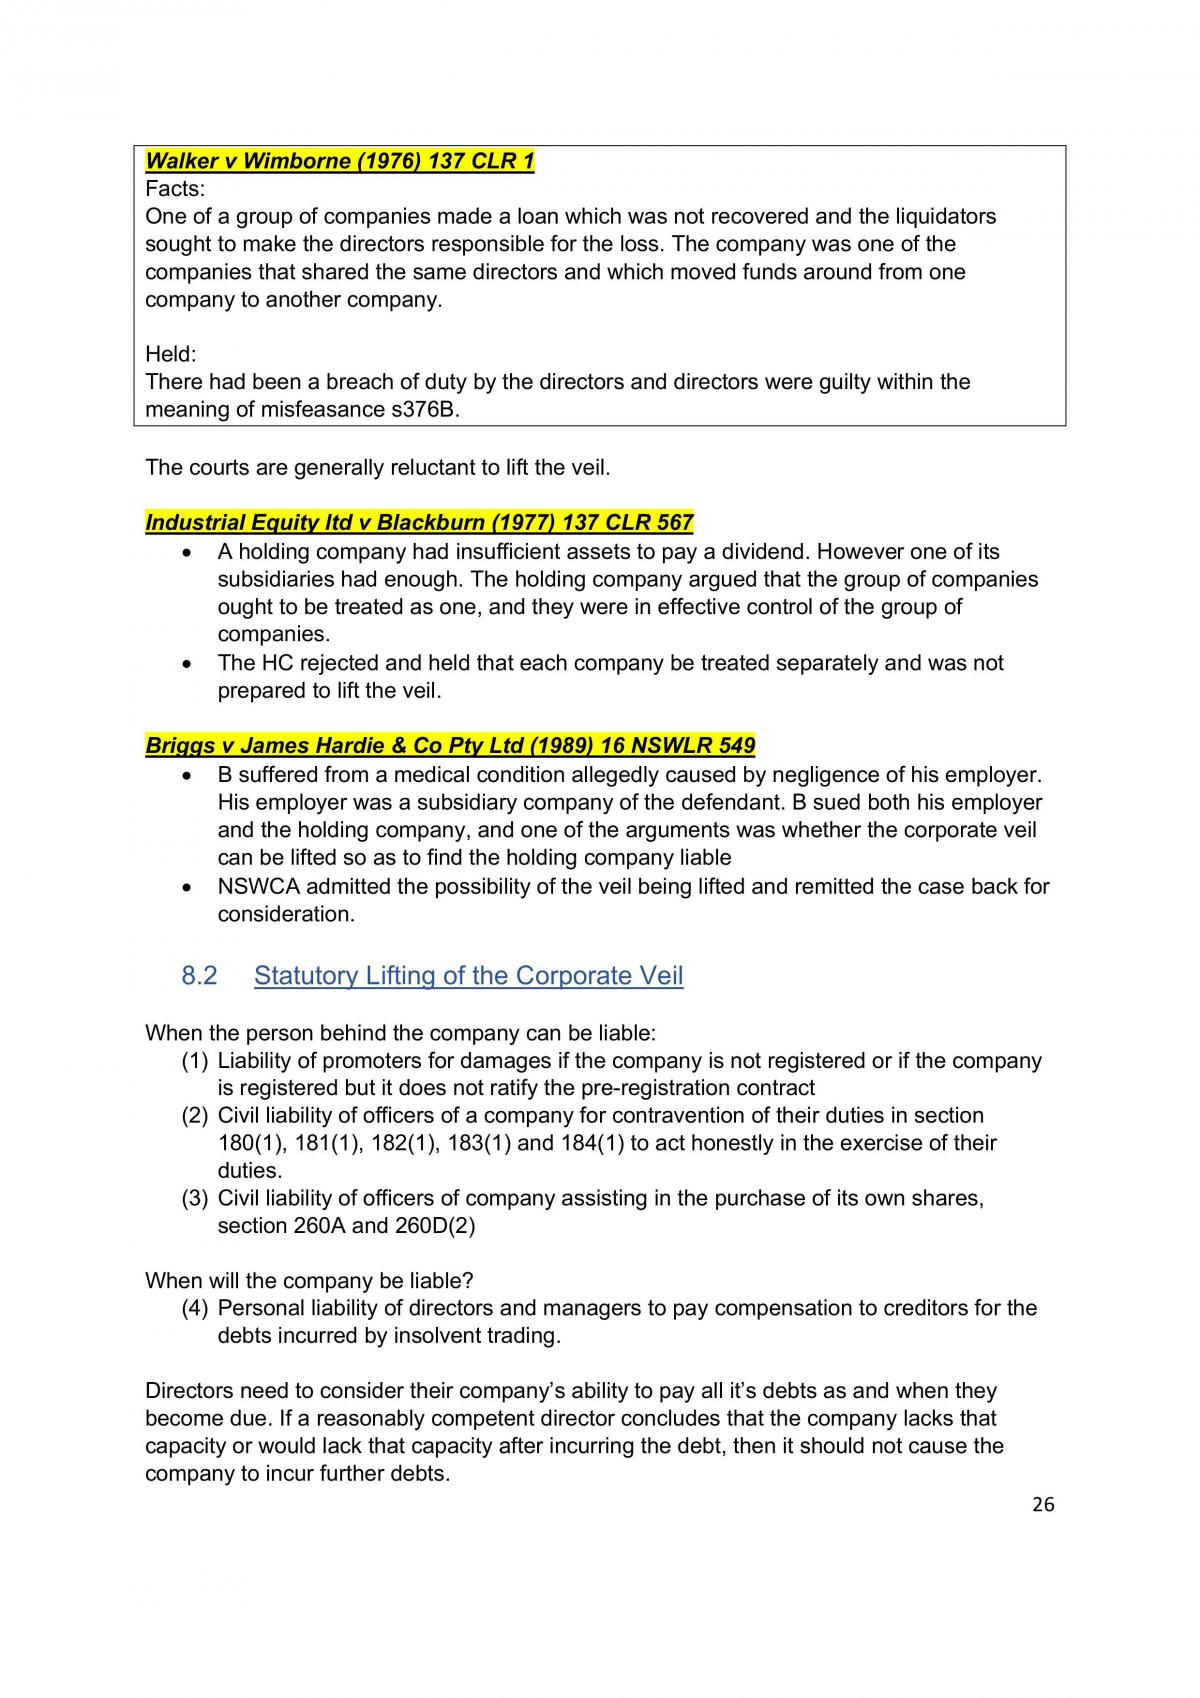 Corporations Law - LAW251 - Page 26